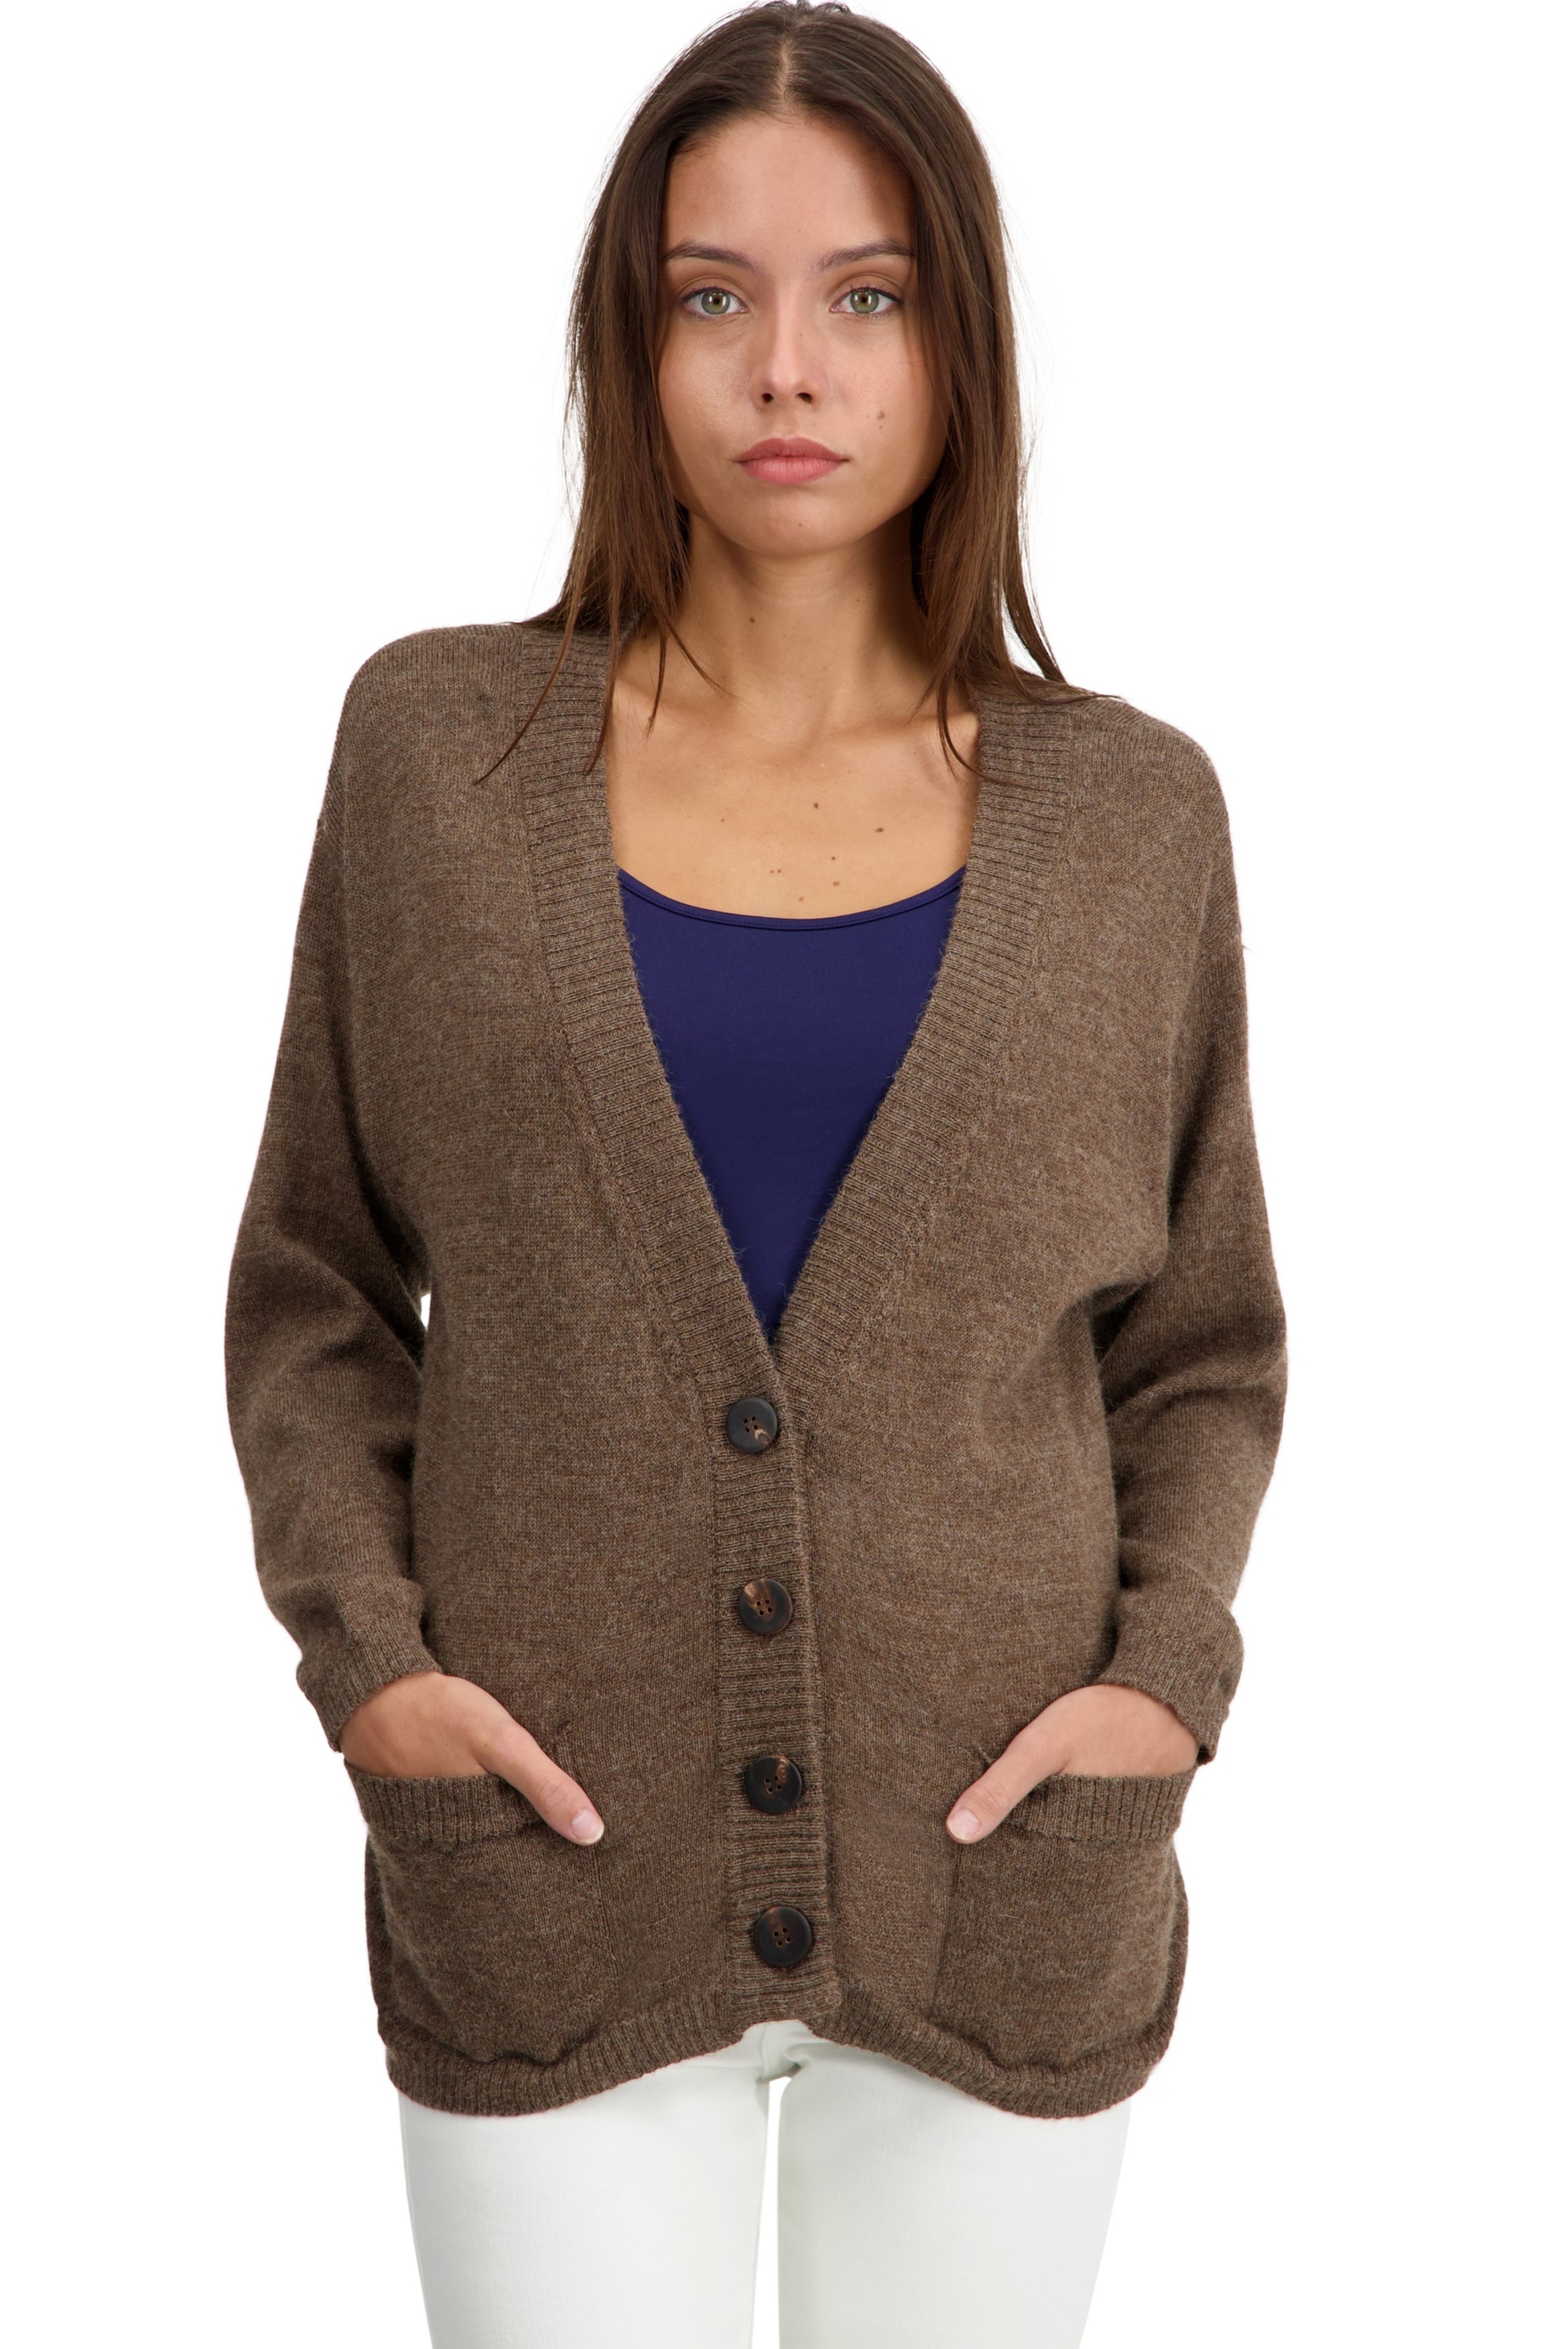 Baby Alpaca ladies cardigans toulouse natural xl